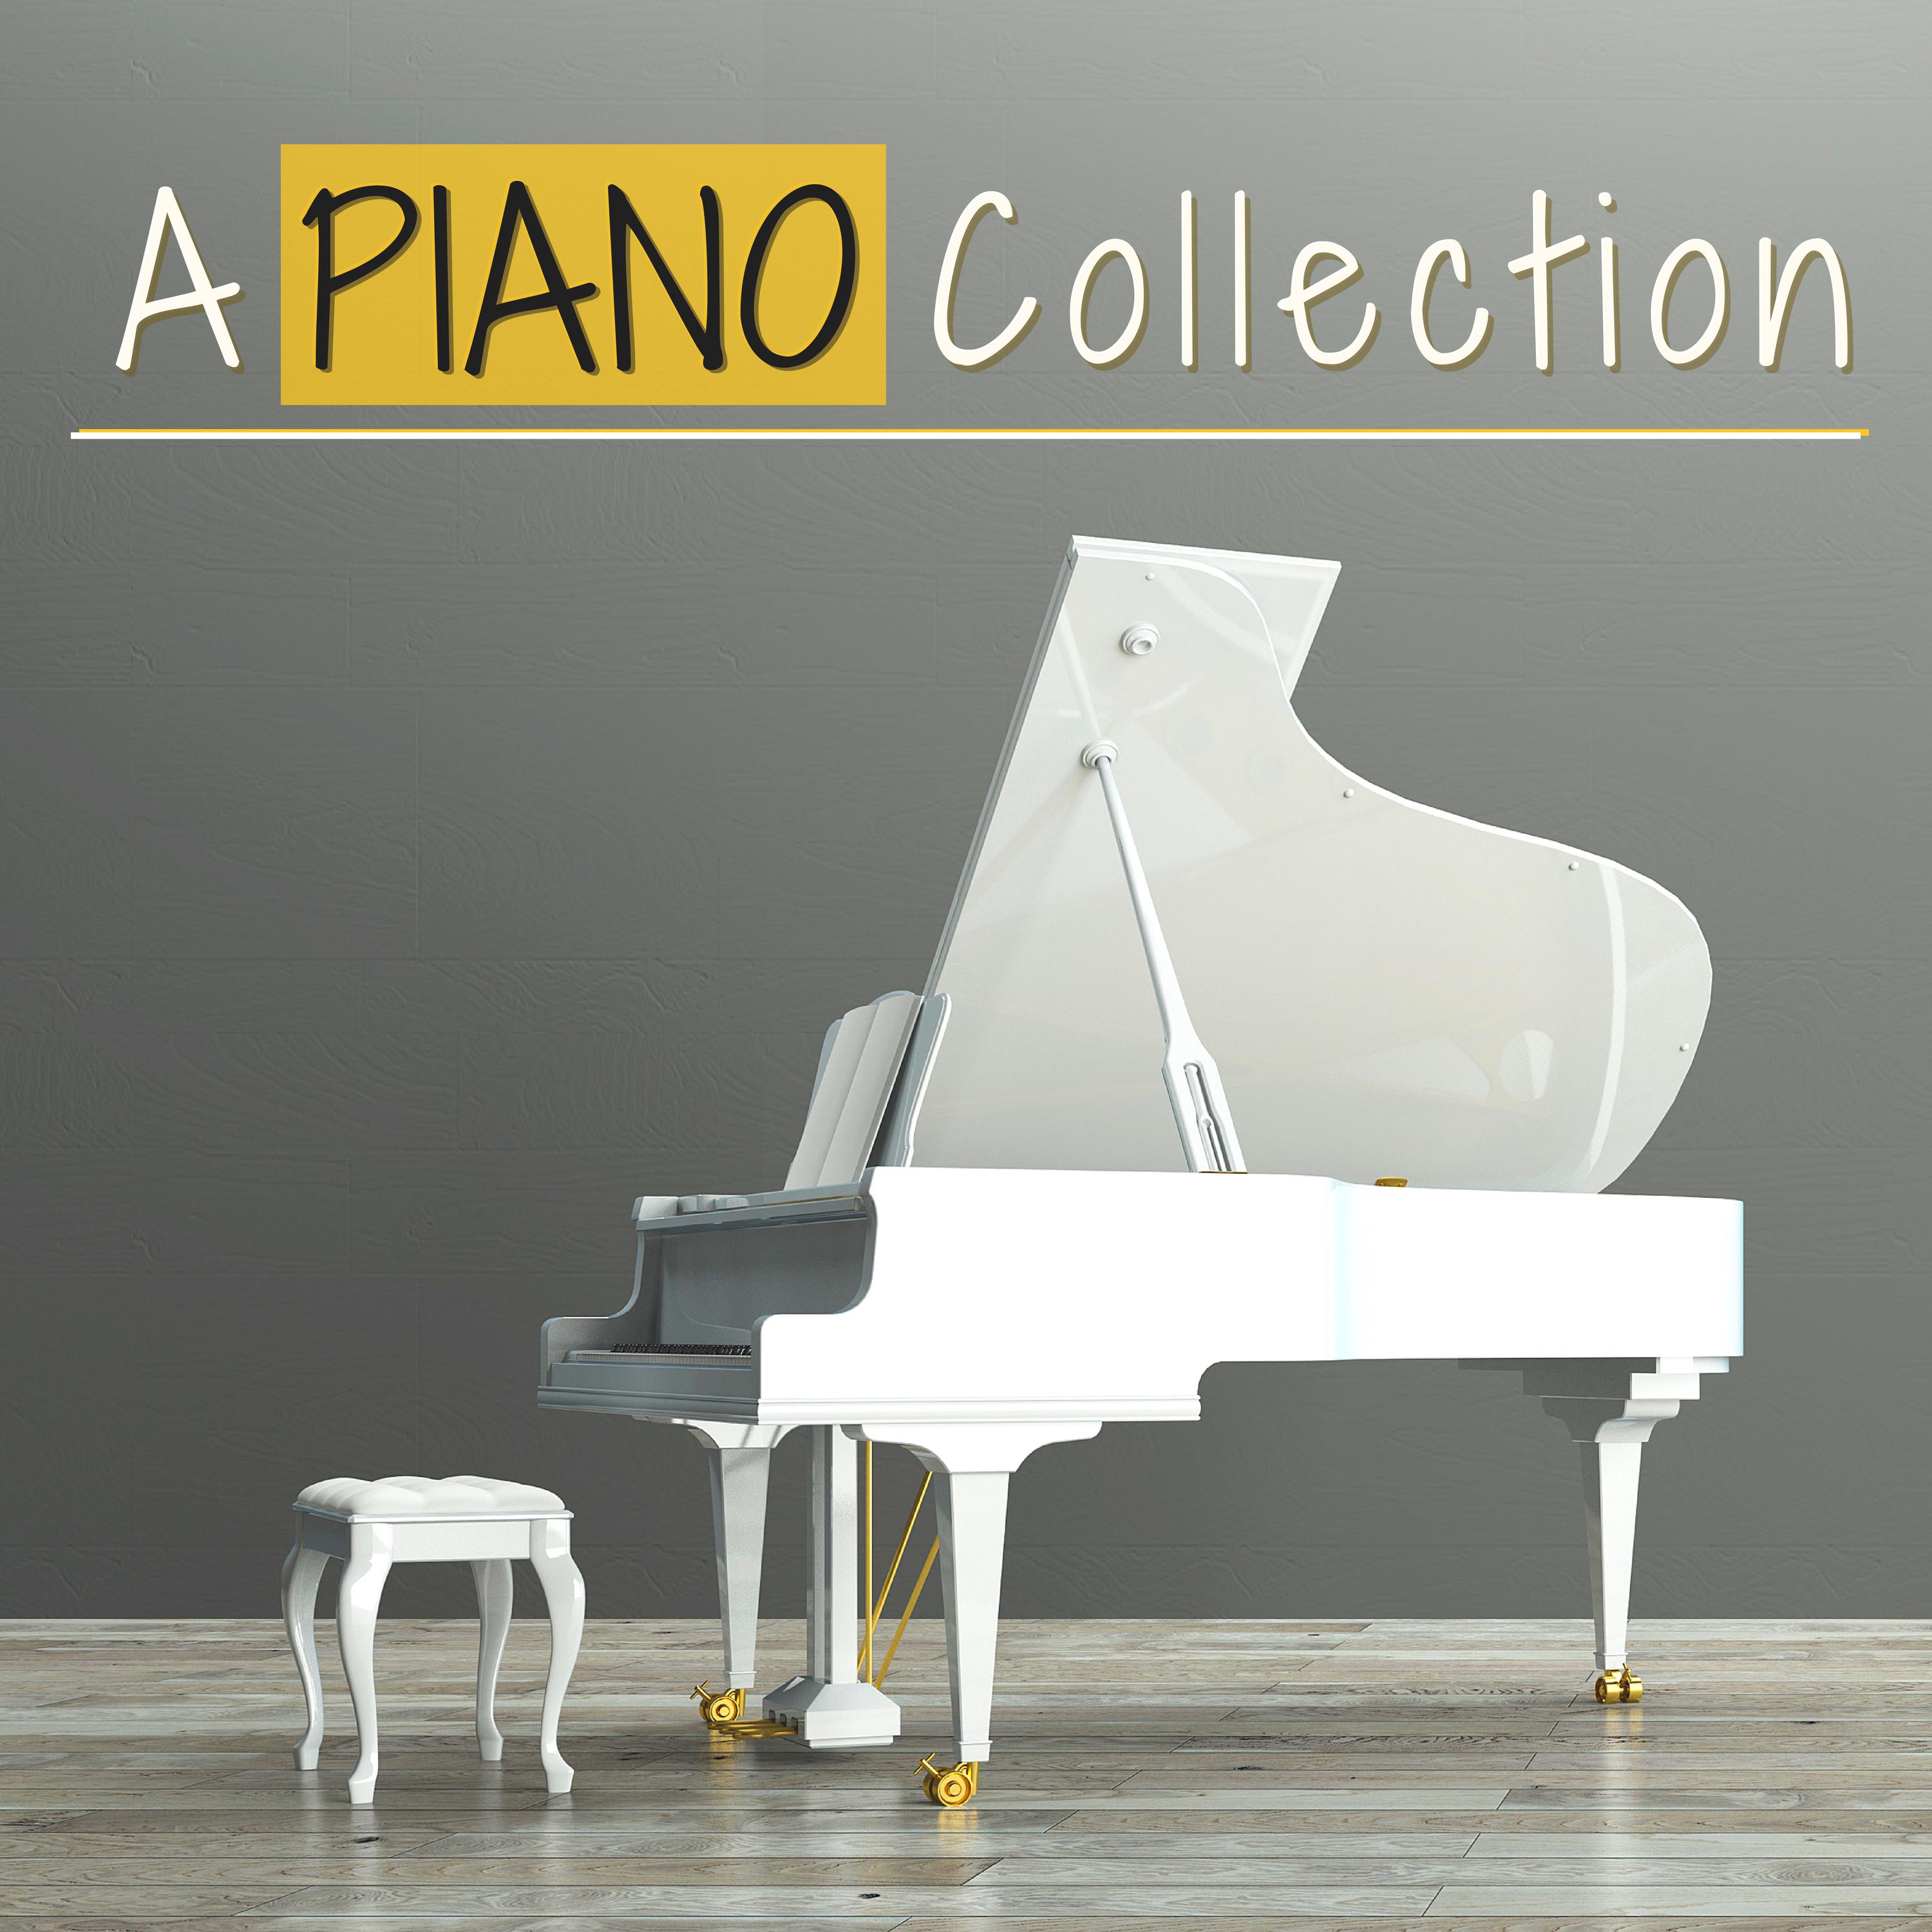 A Piano Collection